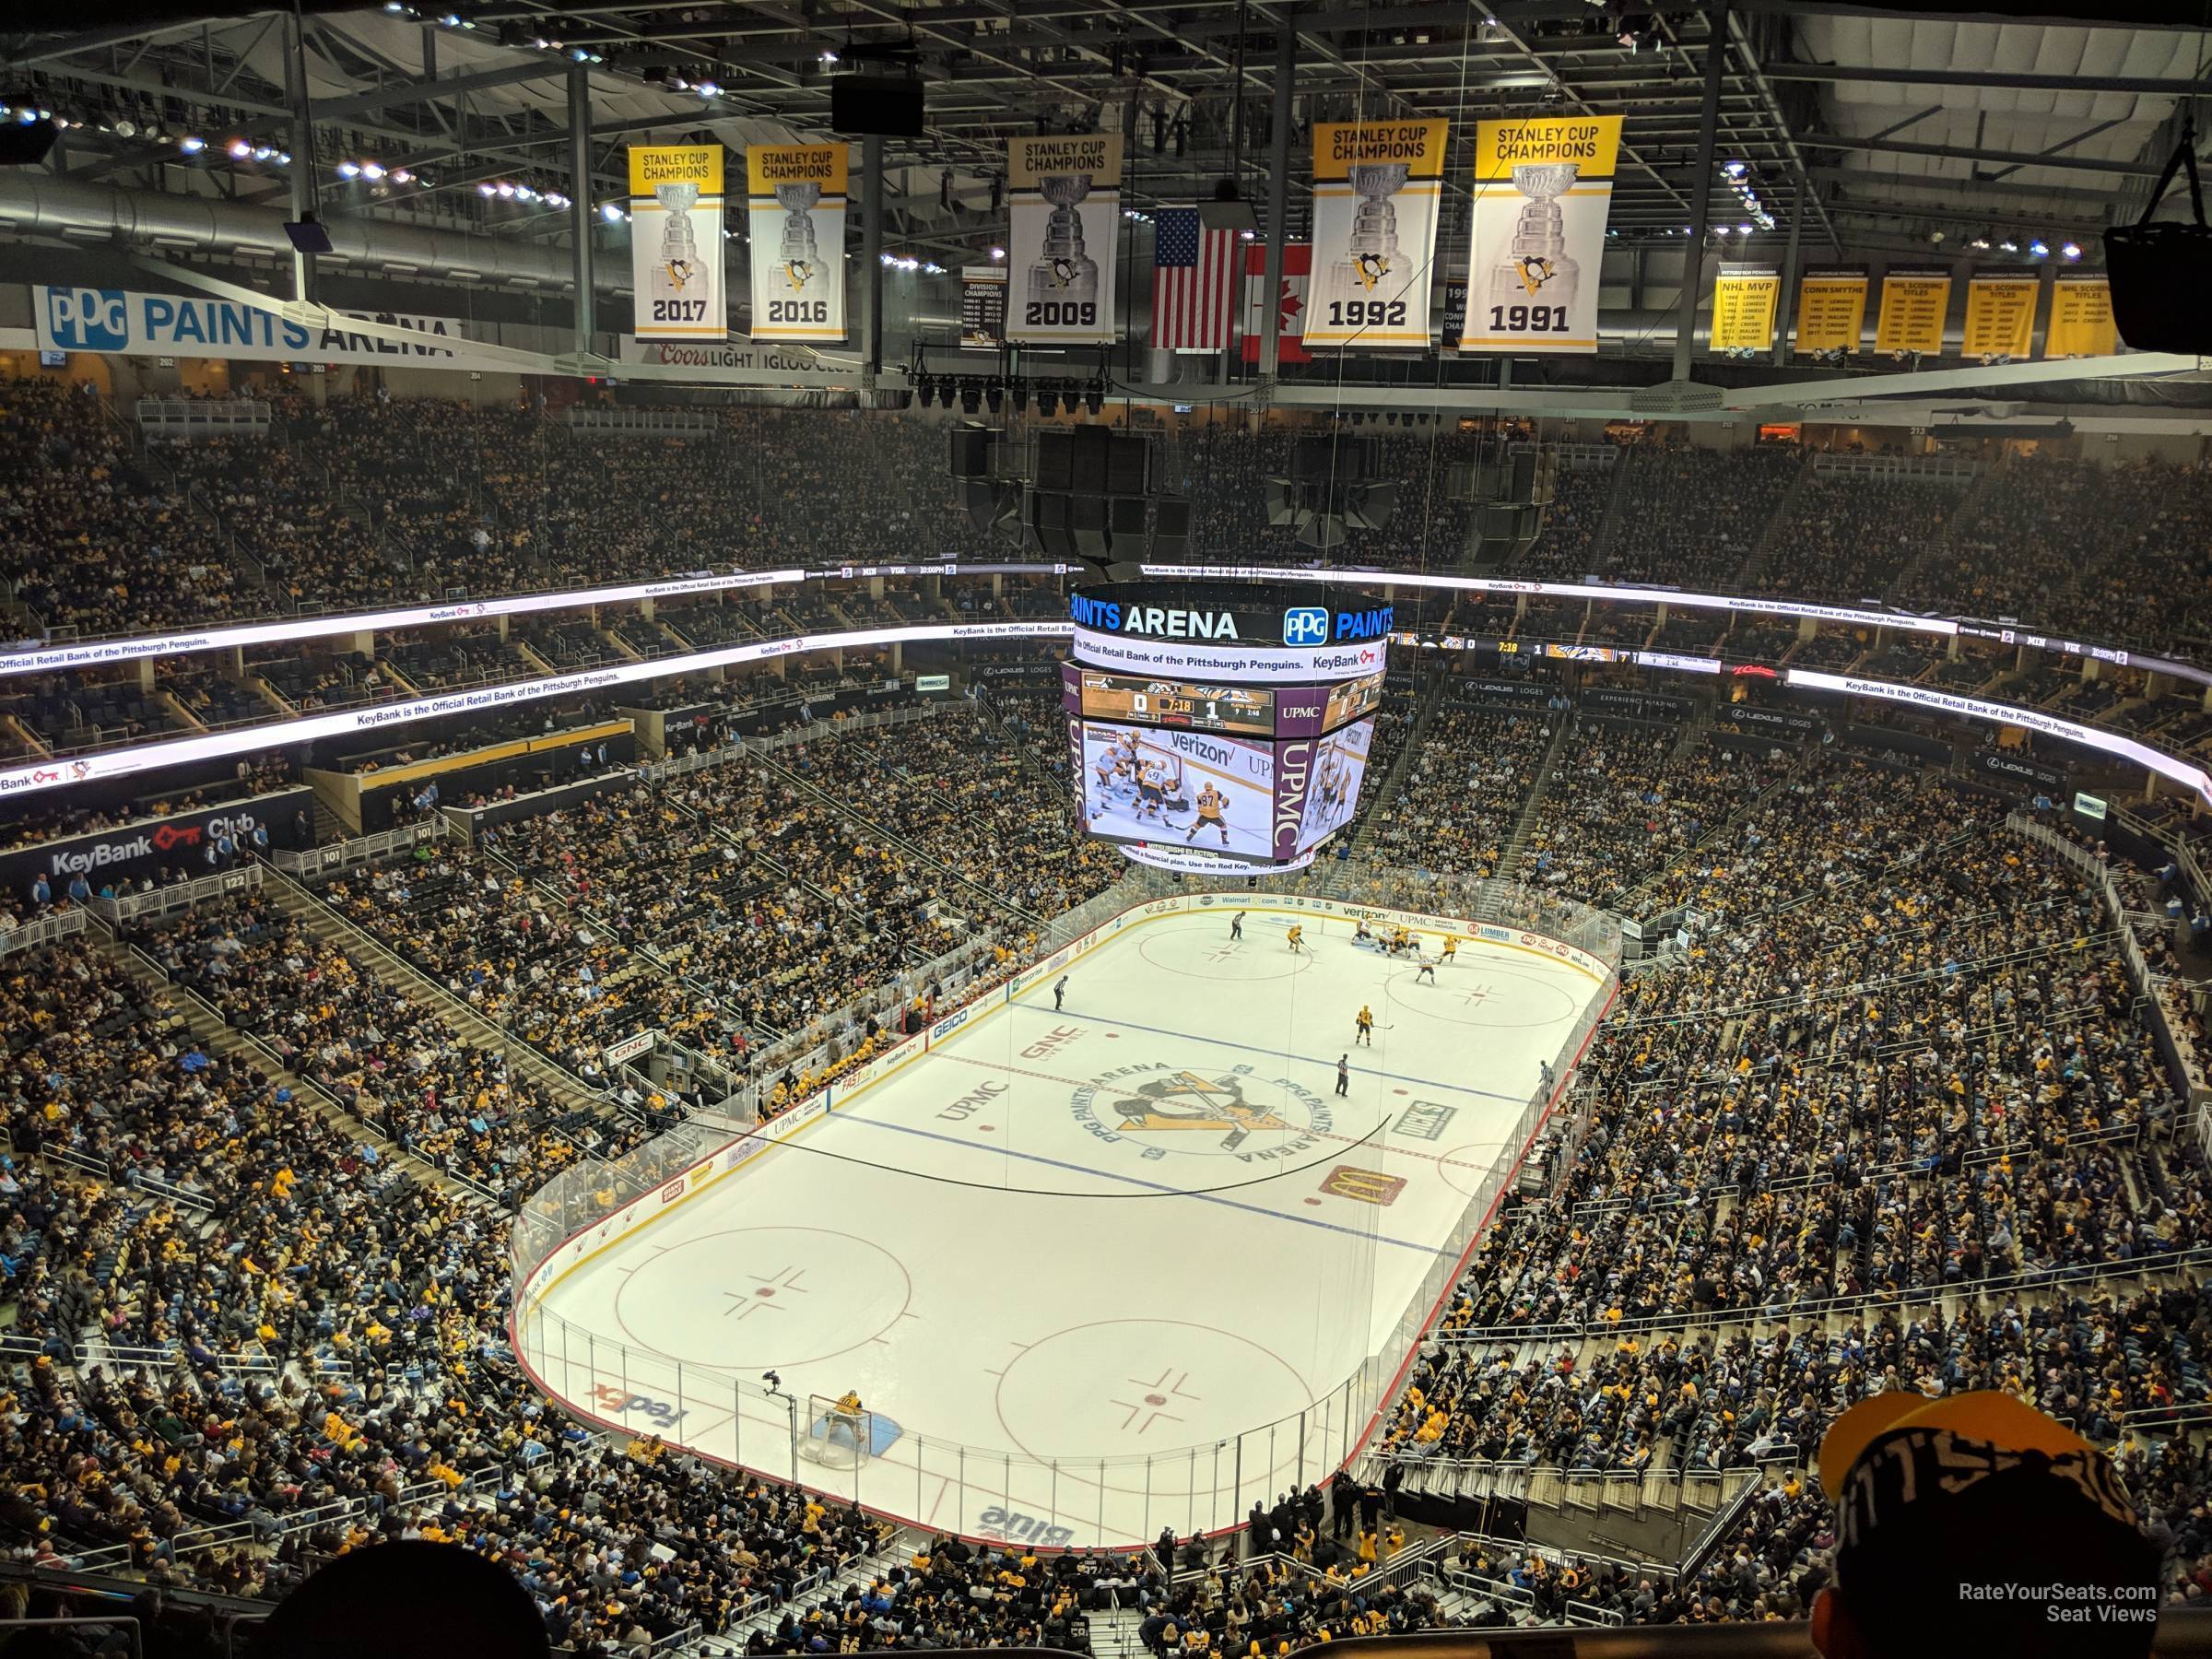 PPG Paints Arena, section Suite 41, home of Pittsburgh Penguins